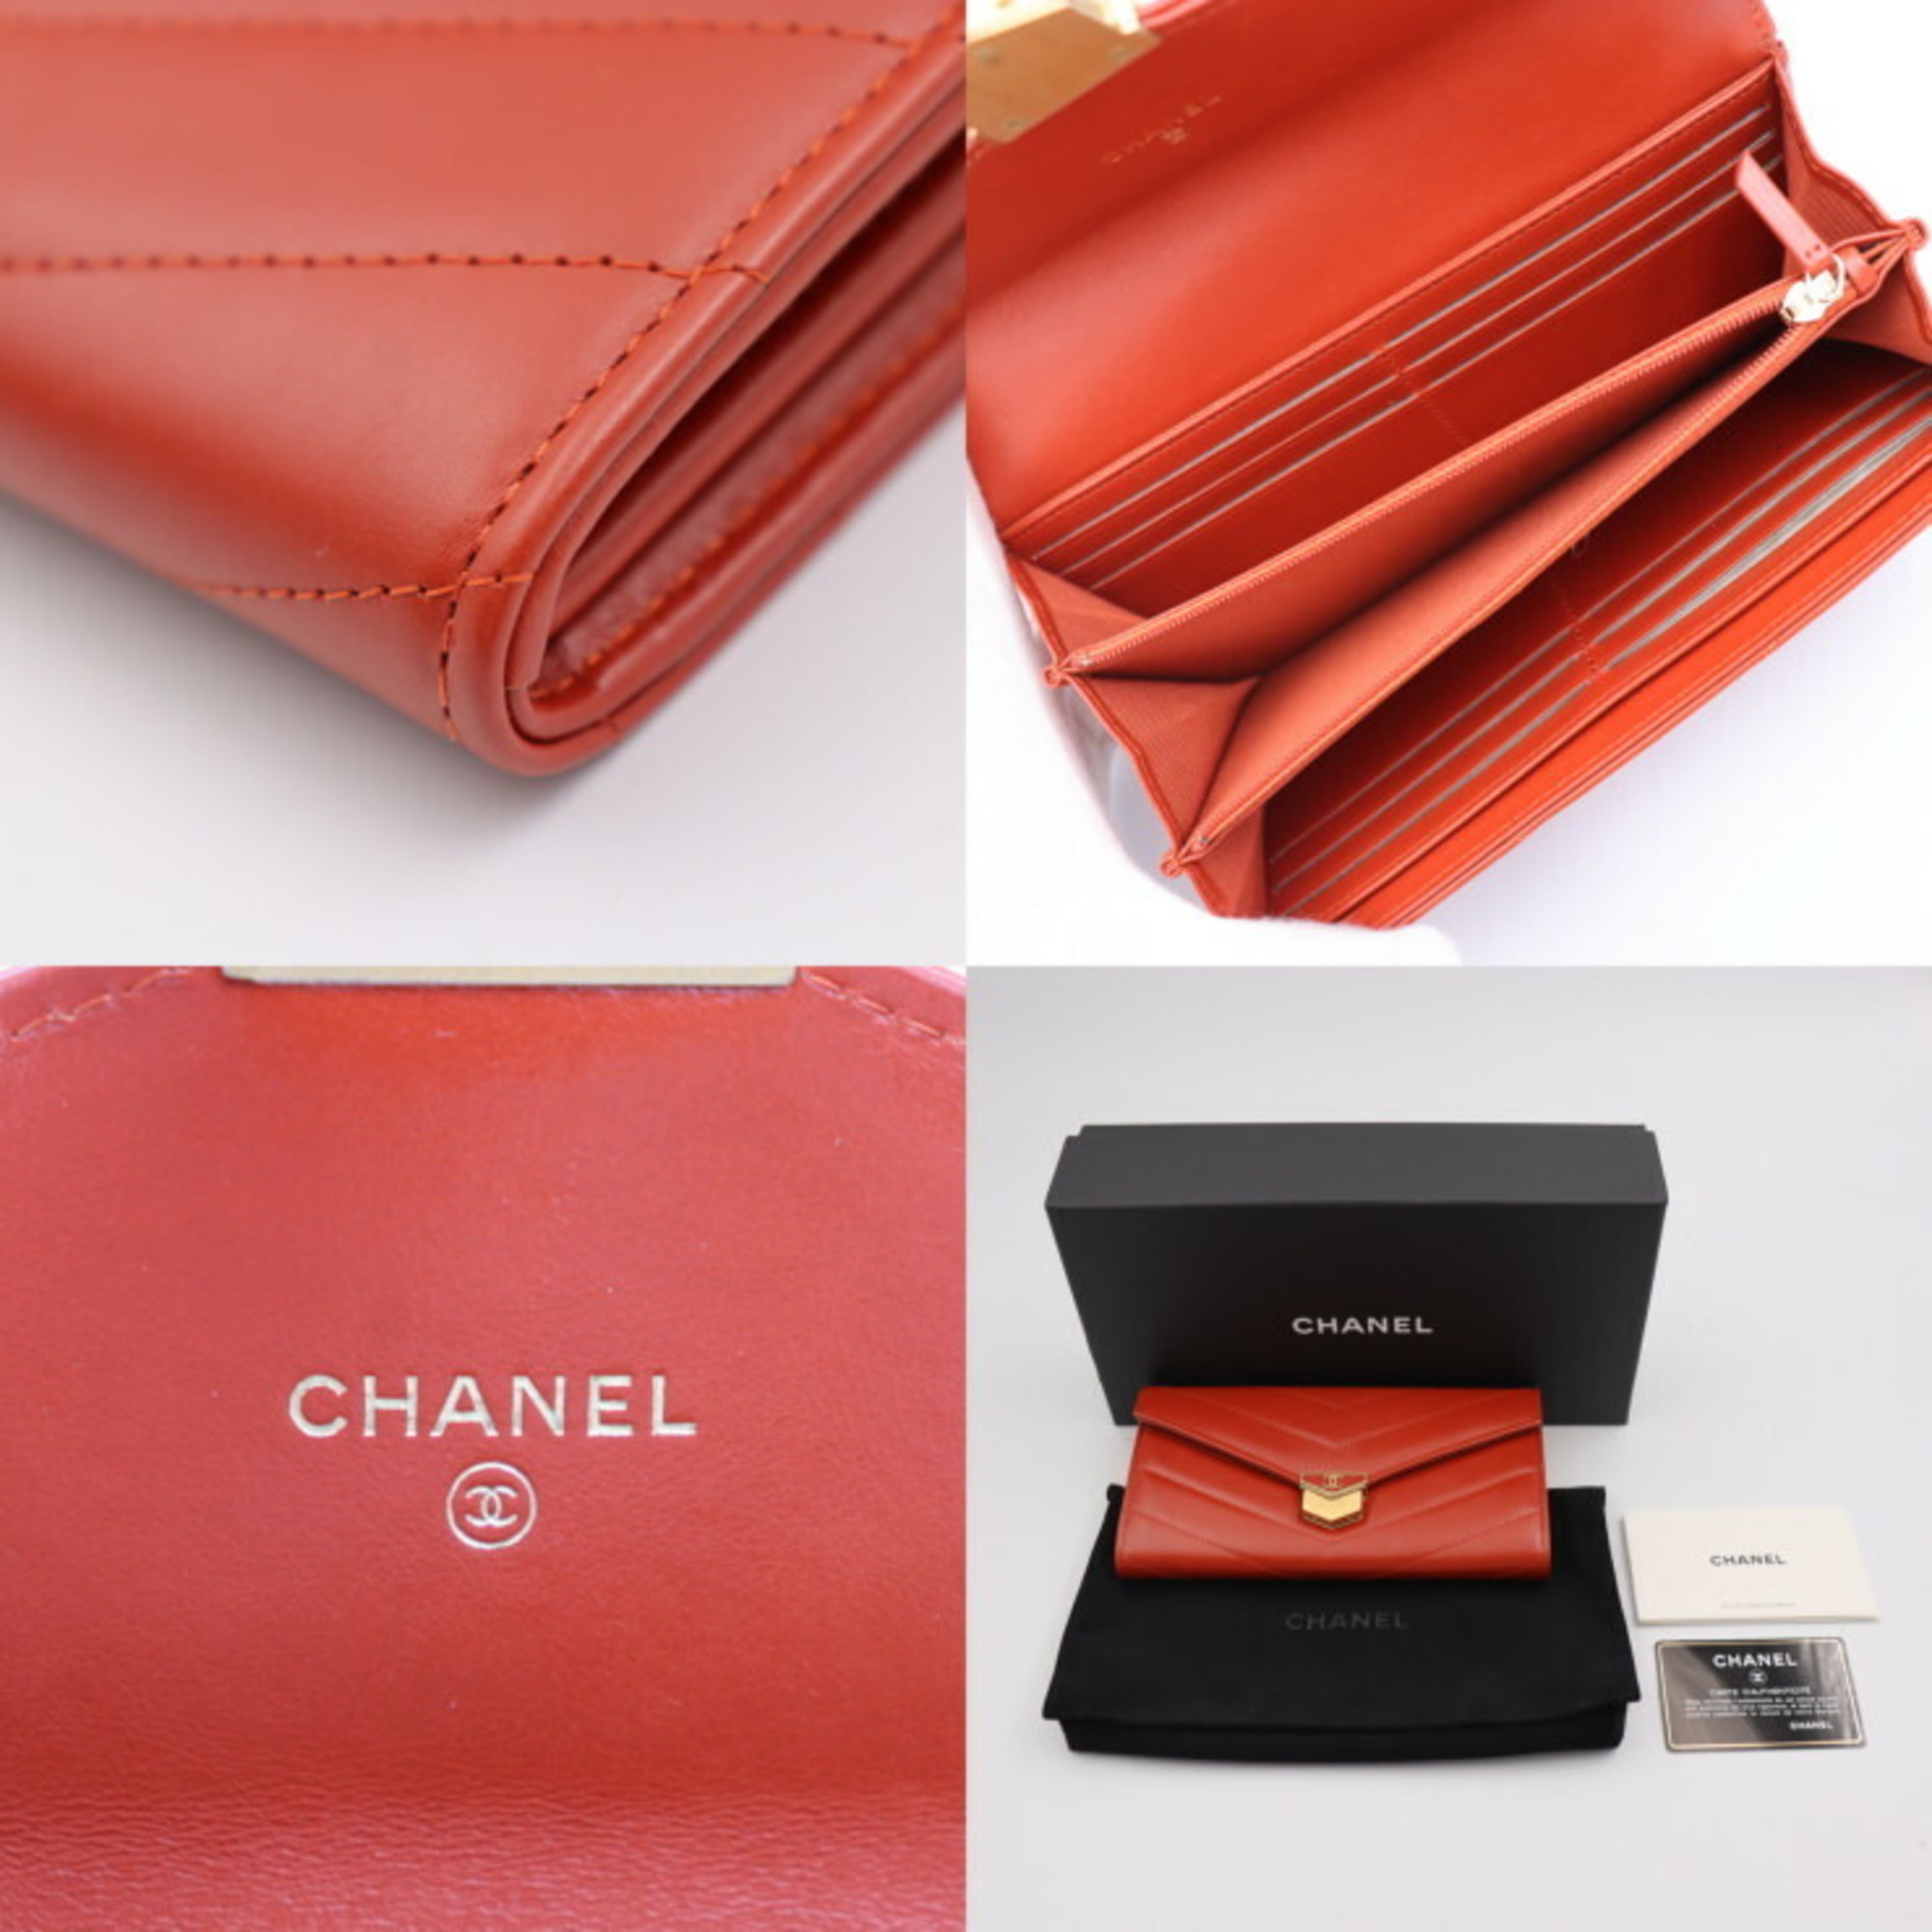 CHANEL Chanel Chevron long wallet A81255 brick color gold metal fittings flap cover lid here mark